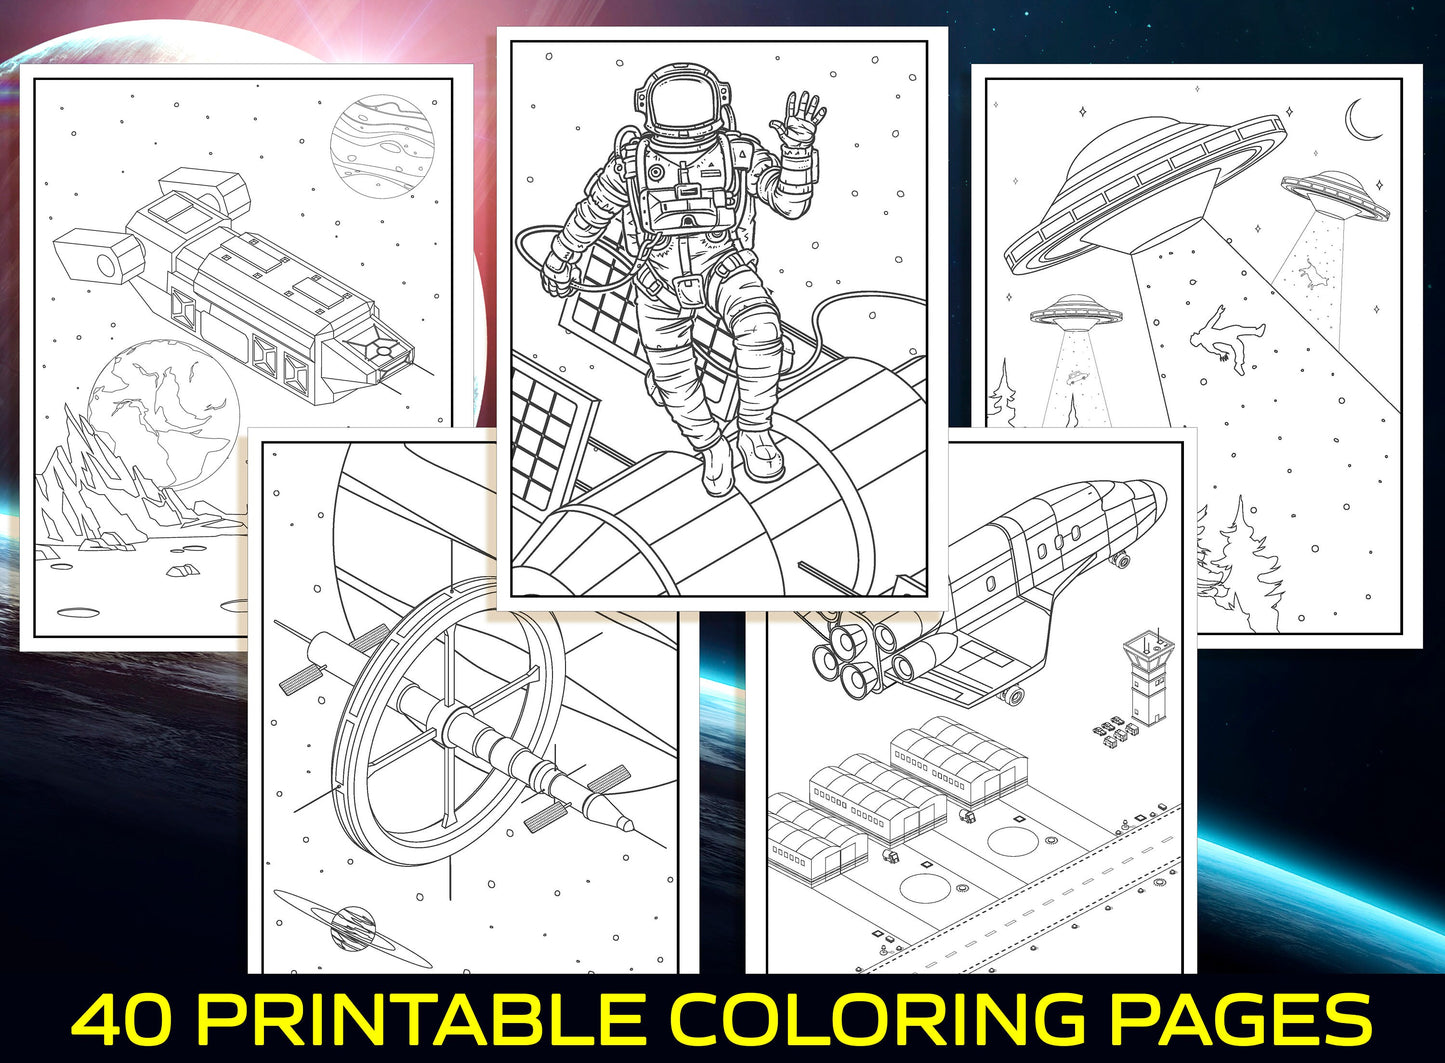 Space Coloring Pages - 40 Printable Space Coloring Pages for Kids, Boys, Girls, Teens. Space Adventures, Galaxy, Astronaut, UFO, Aliens...